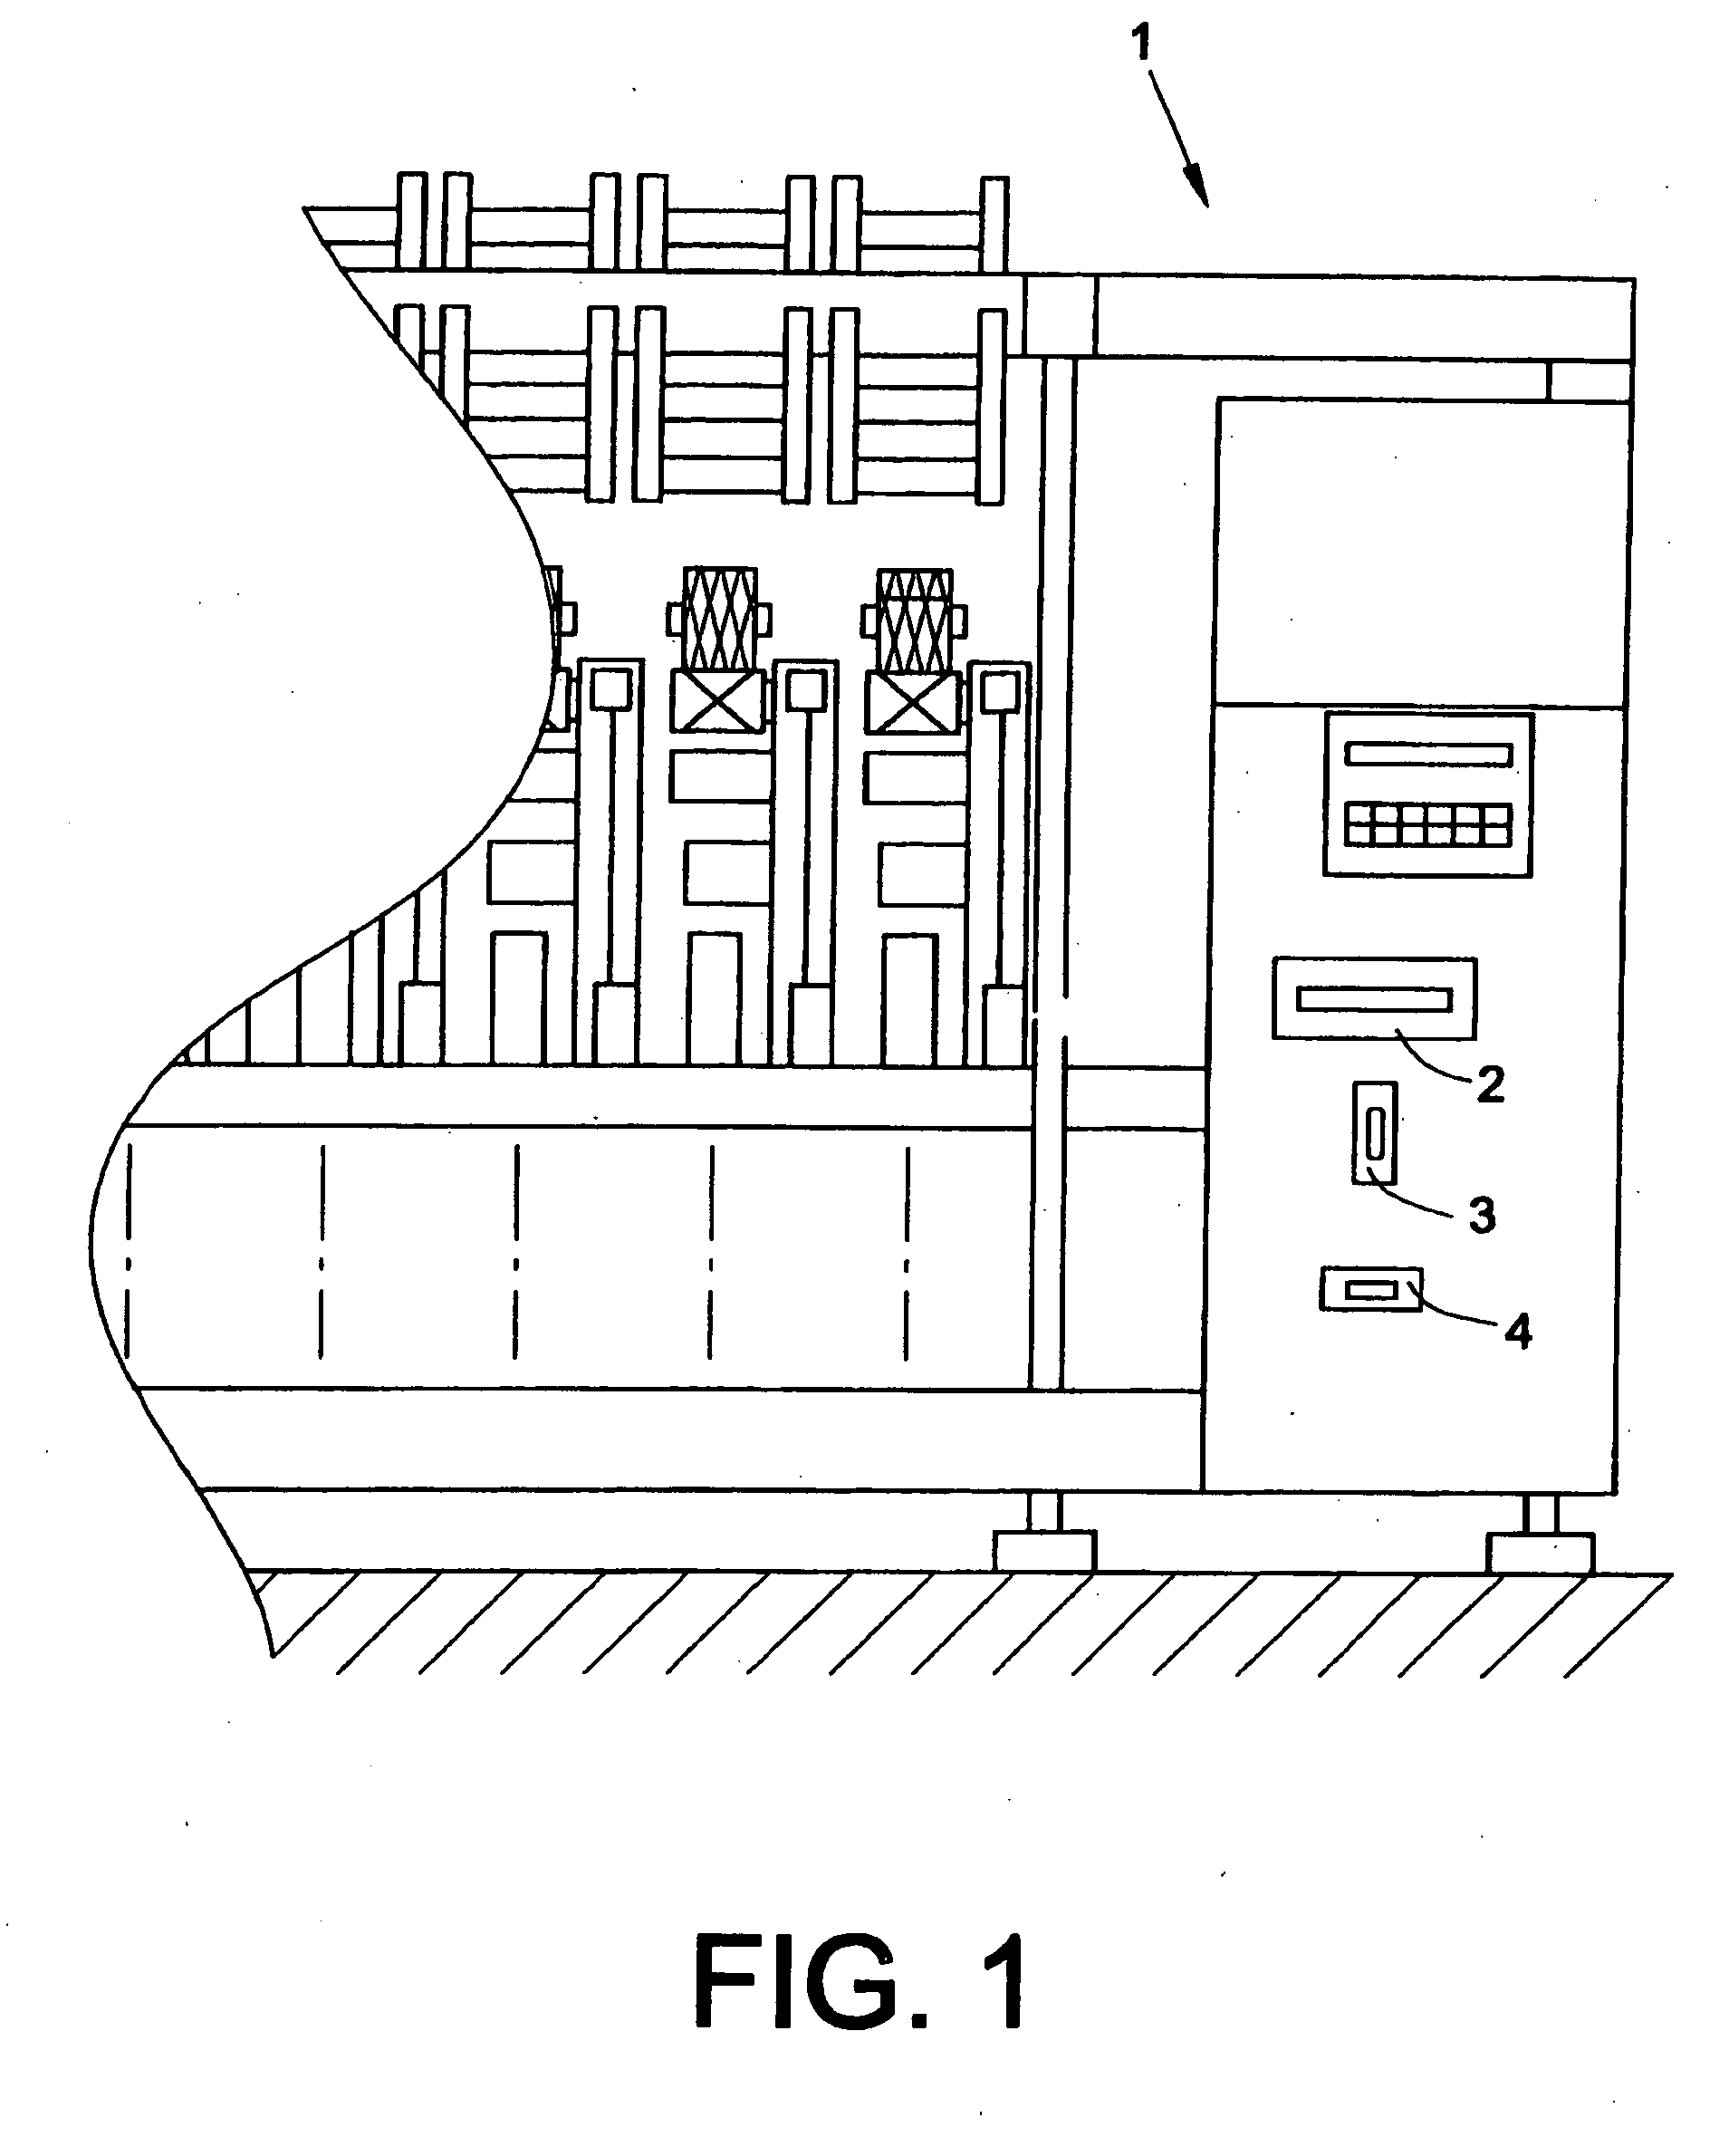 Method for the Bidirectional Transmission of Data Between One or More Textile Machines